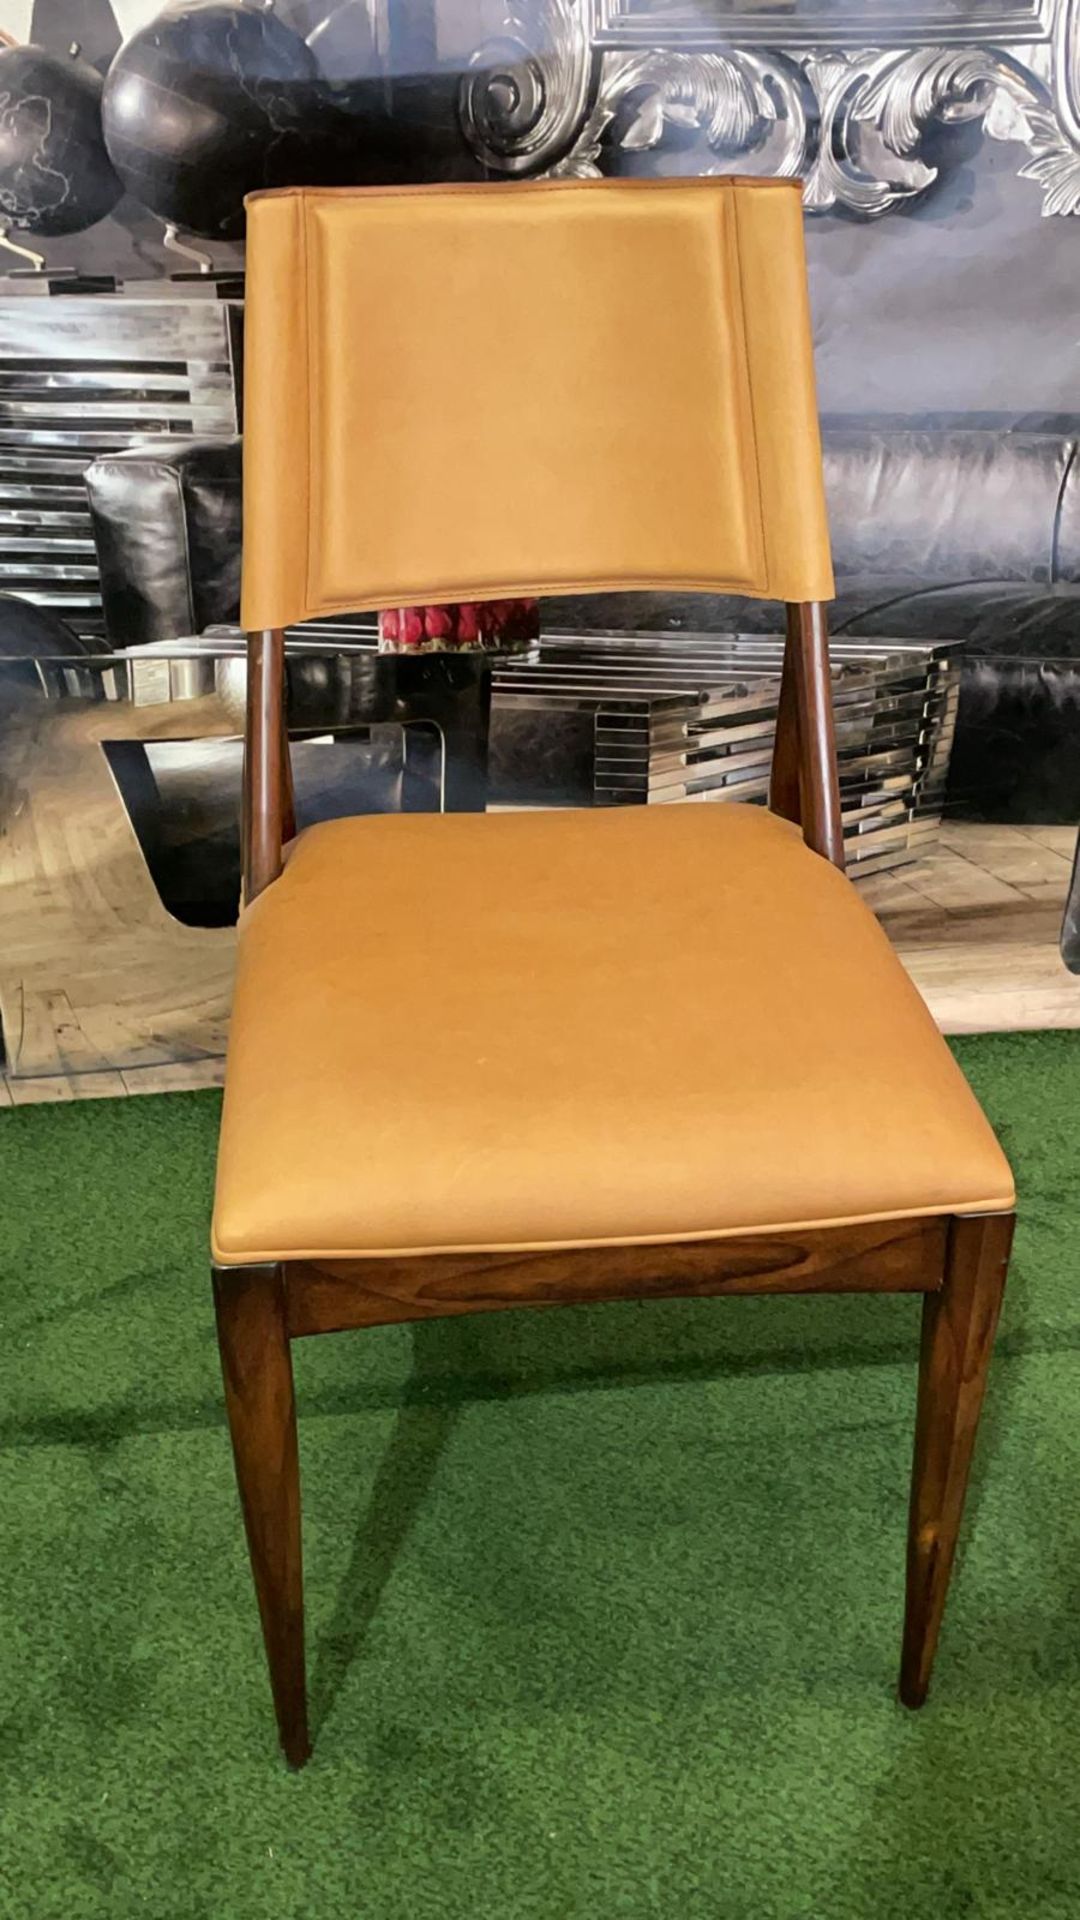 Starbay Side Chair Camel Leather And Walnut Dining Chair Sleek Design Equally At Home In - Bild 2 aus 2